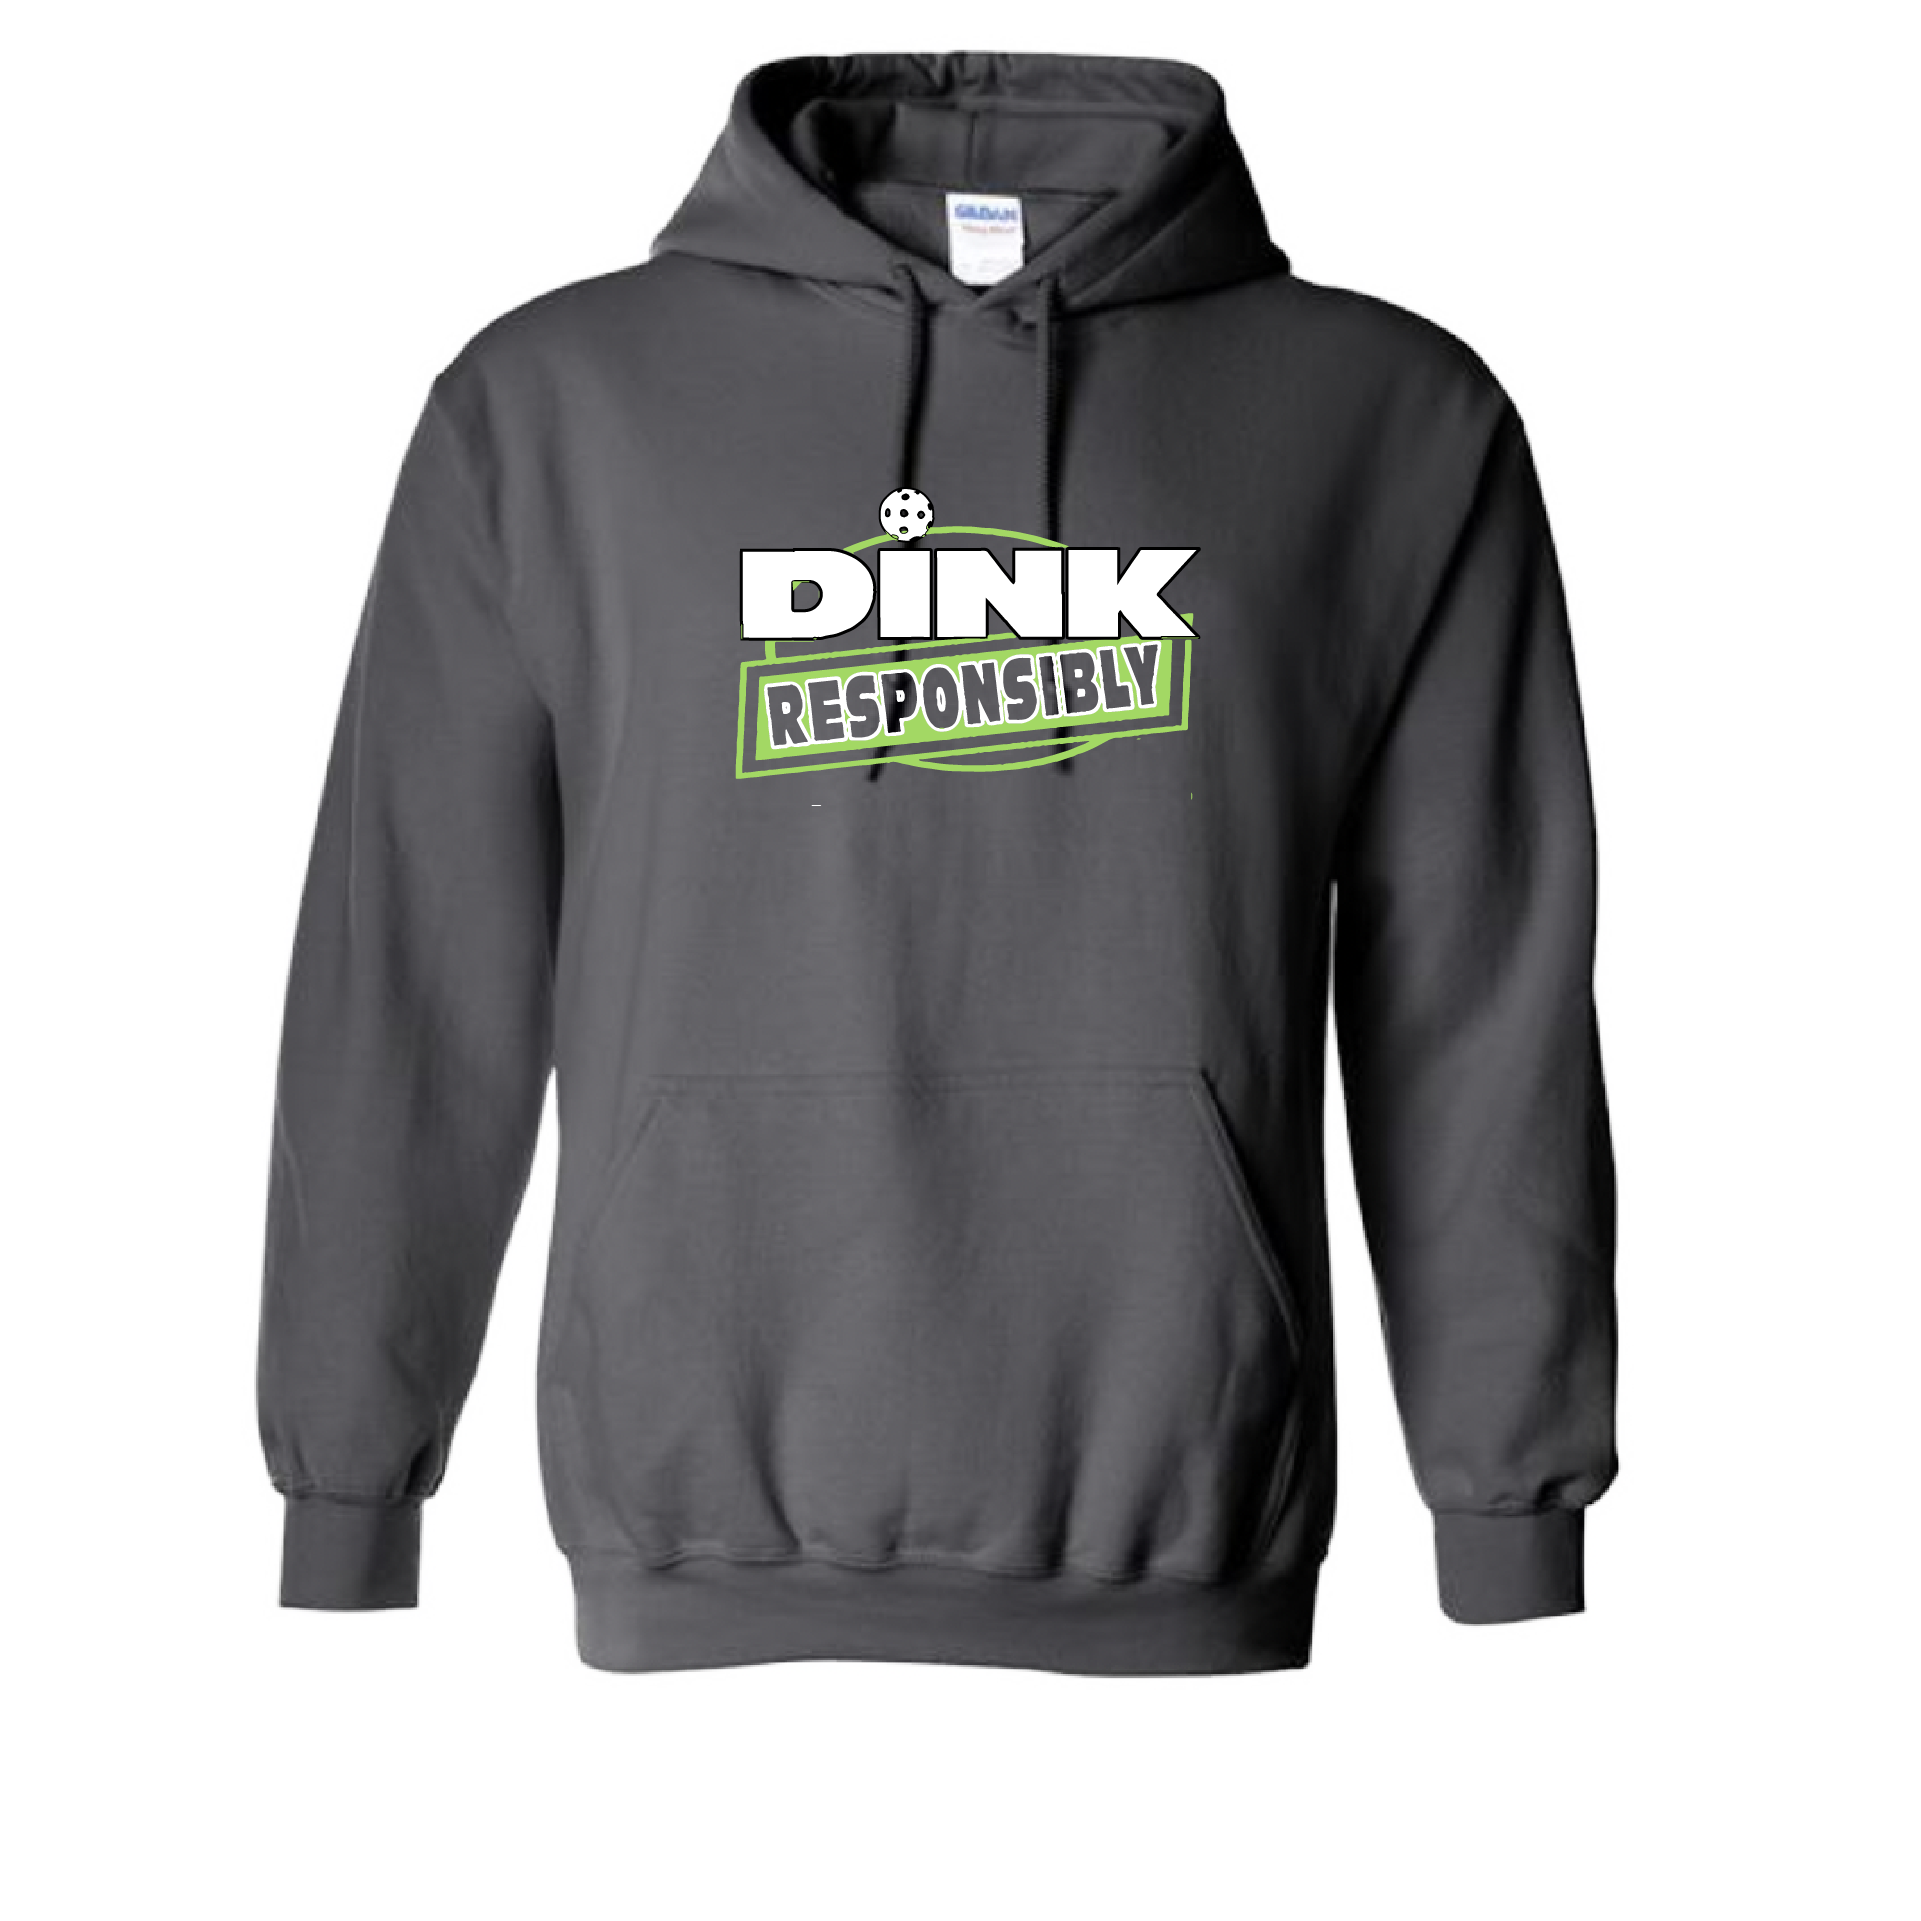 Pickleball Design: Dink Responsibly  Unisex Hooded Sweatshirt: Moisture-wicking, double-lined hood, front pouch pocket.  This unisex hooded sweatshirt is ultra comfortable and soft. Stay warm on the Pickleball courts while being that hit with this one of kind design.